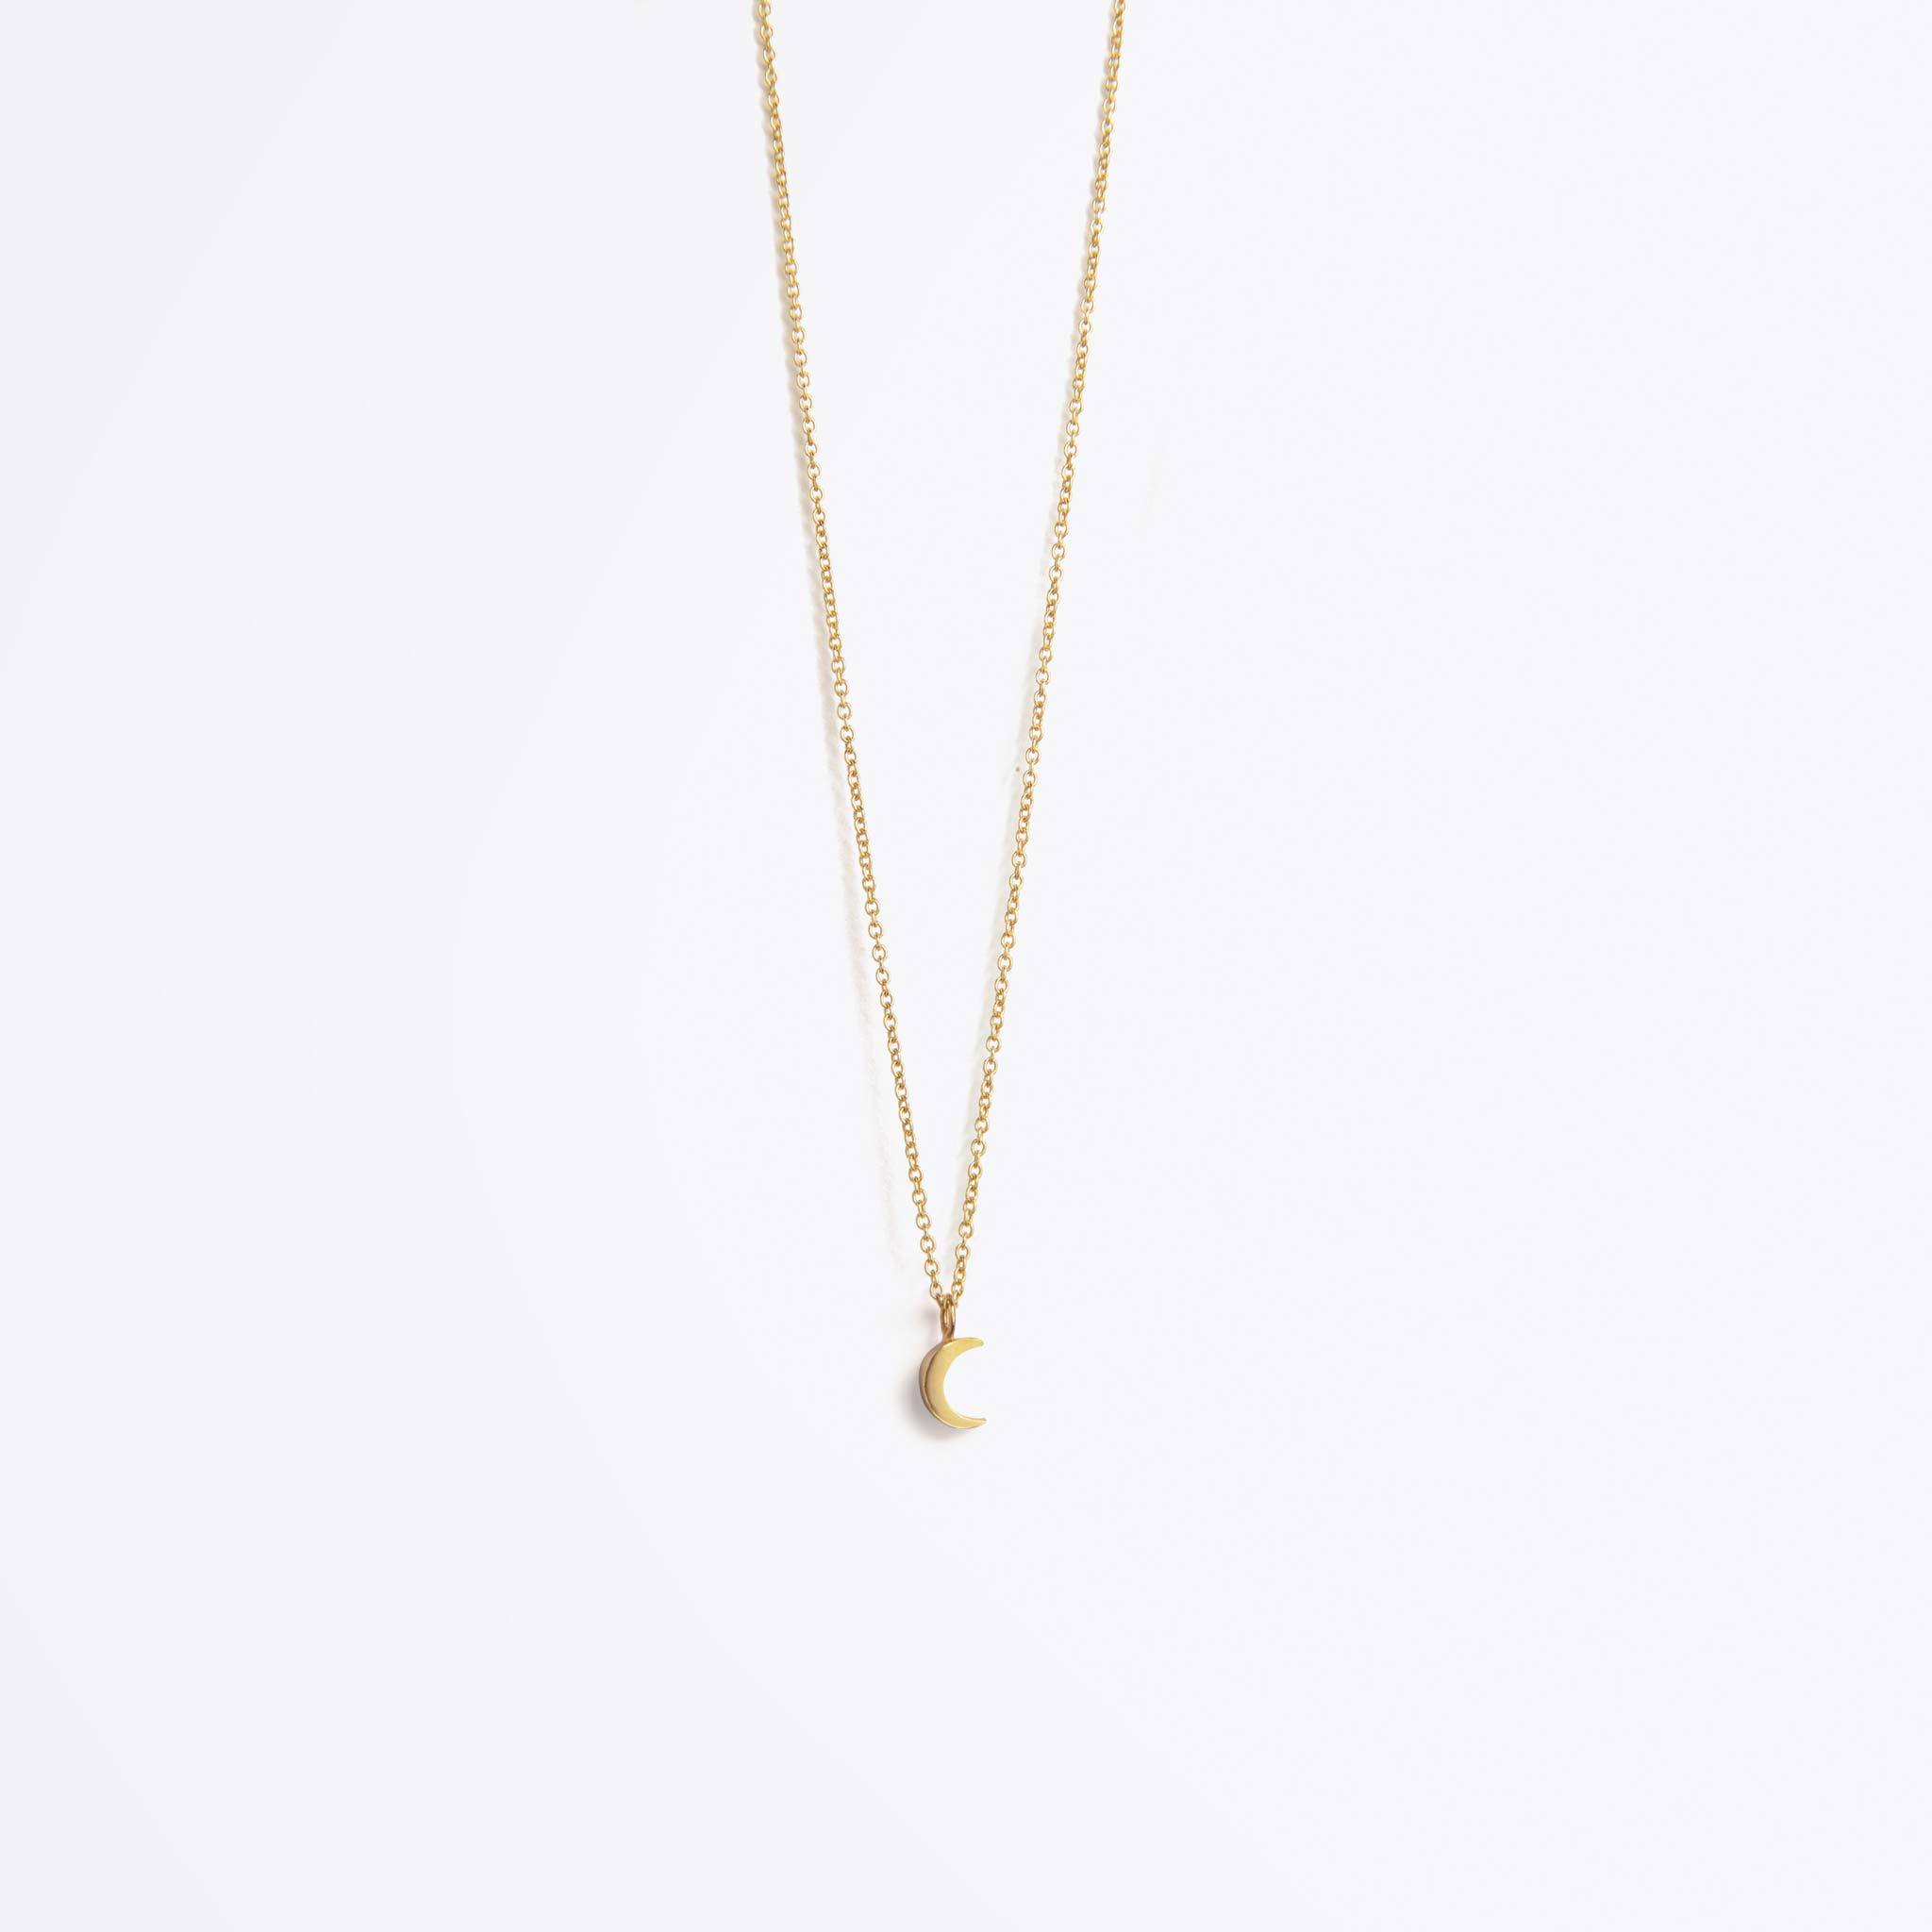 gold chain with pendant